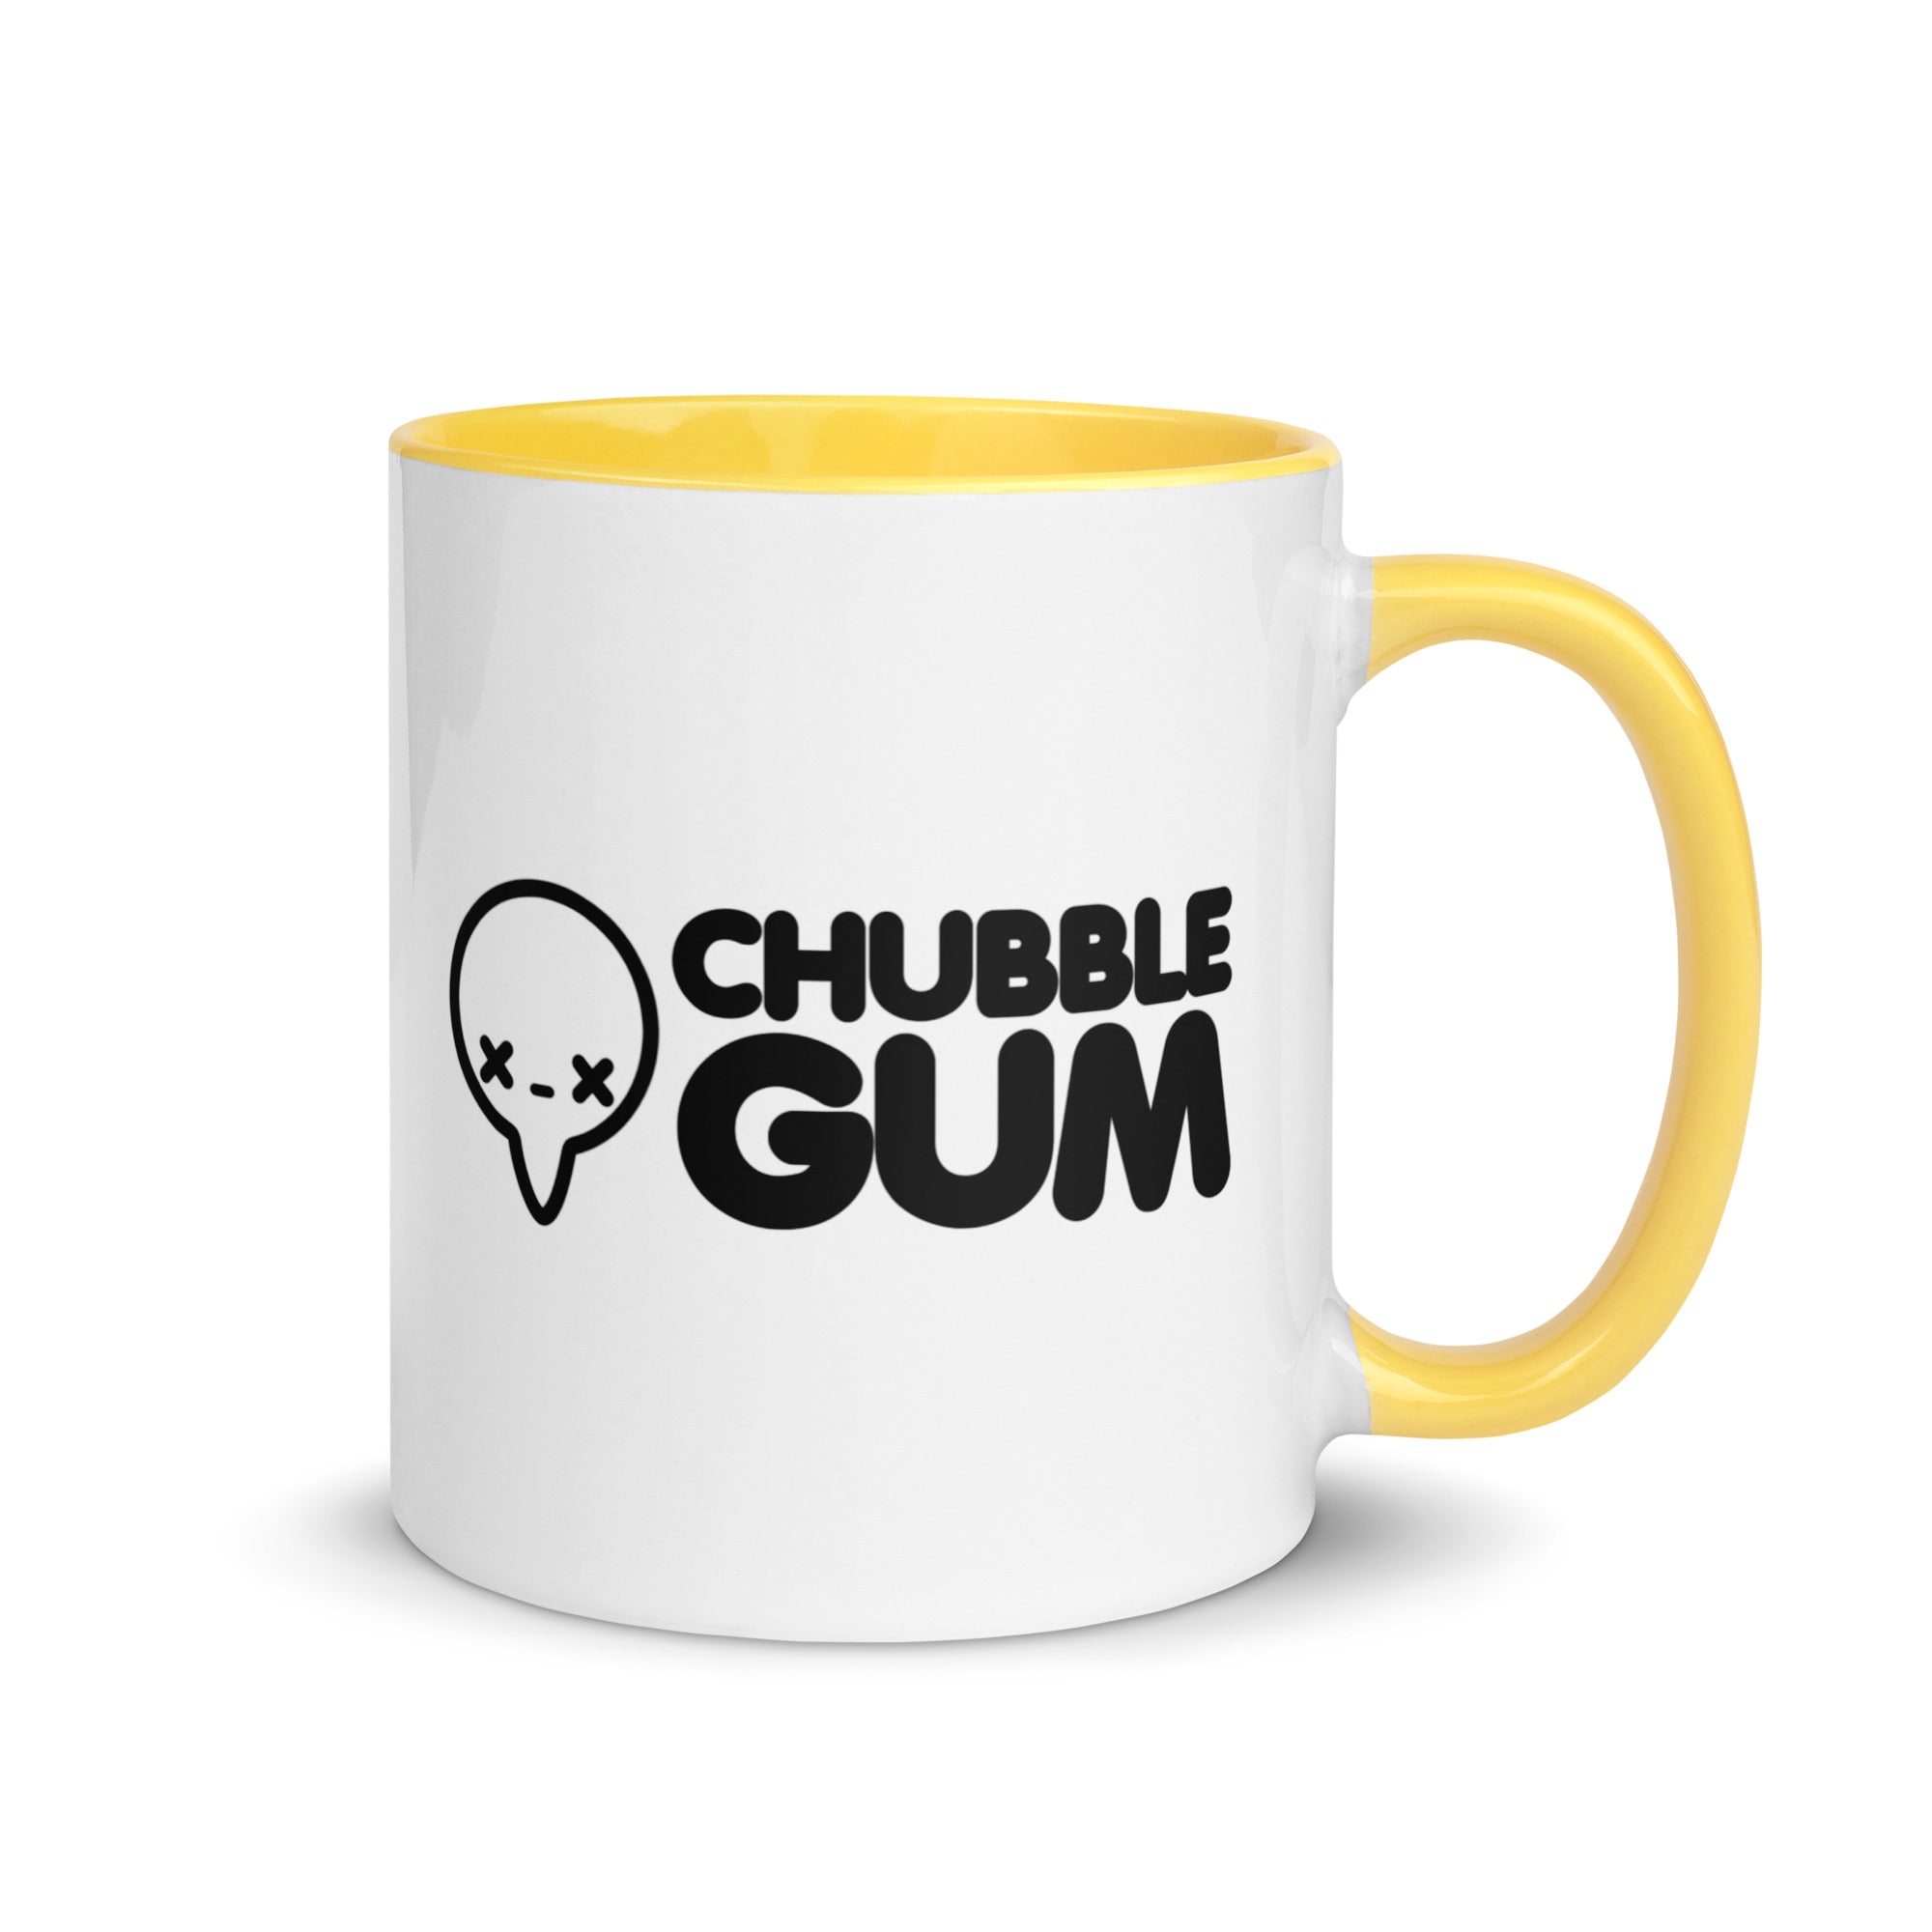 AND THERES NOTHING YOU CAN DO ABOUT IT - Mug With Color Inside - ChubbleGumLLC